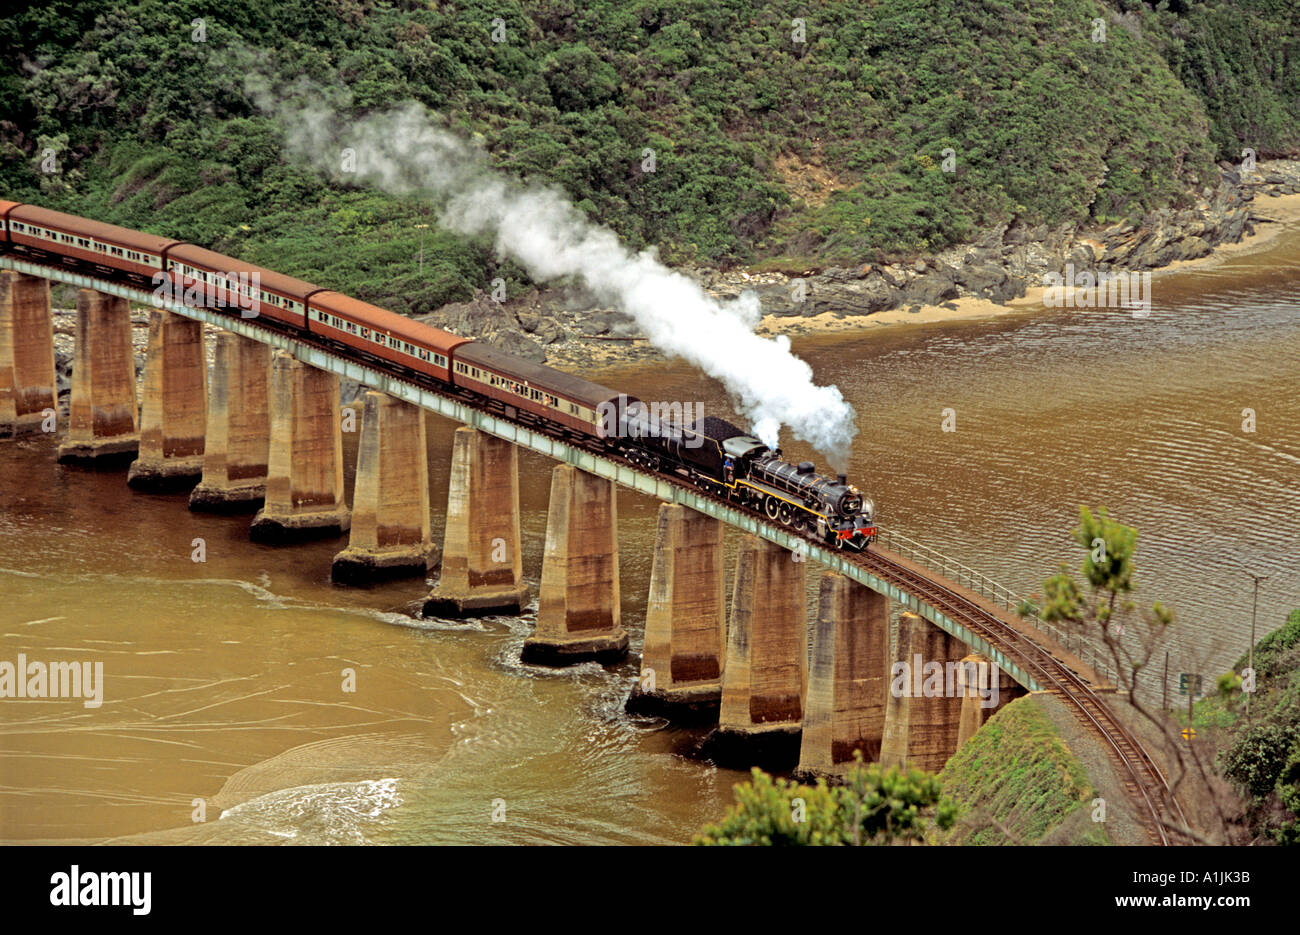 WILDERNESS SOUTH AFRICA October Tootsie a steam train at Dolphin Point crossing Kaaimans River Bridge Stock Photo